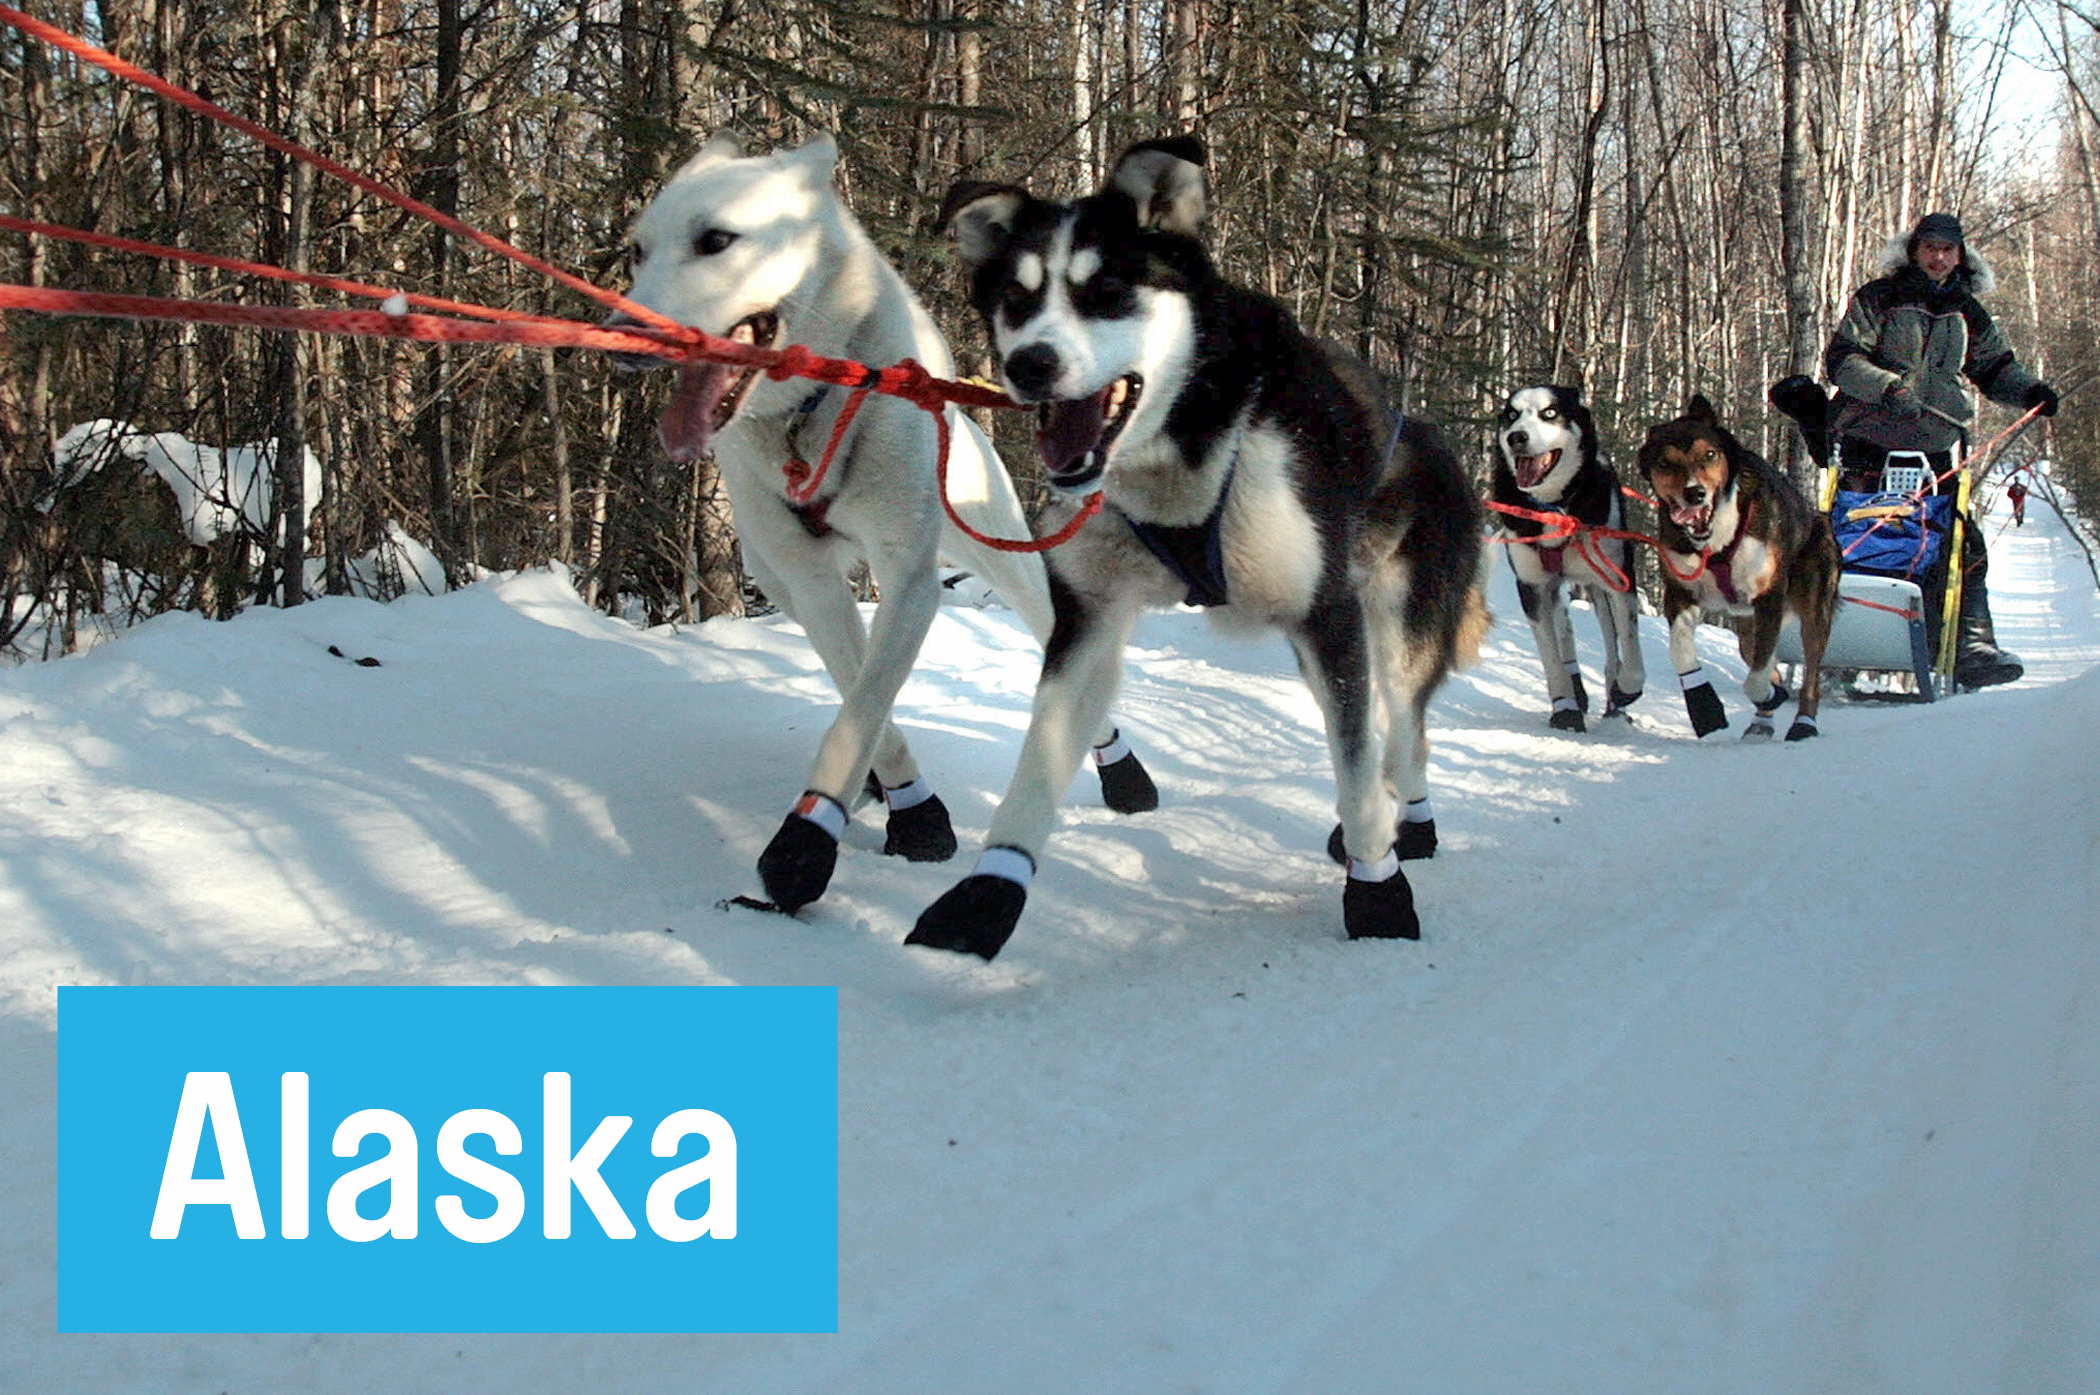 Go ahead and yell "Mush! Mush!" at the <a href="http://iditarod.com/resources/about/headquarters/" target="_blank">Iditarod Trail Sled Dog Race Headquarters</a>, in Wasilla. Just remember that the dogs you'll meet there are officially retired from racing.